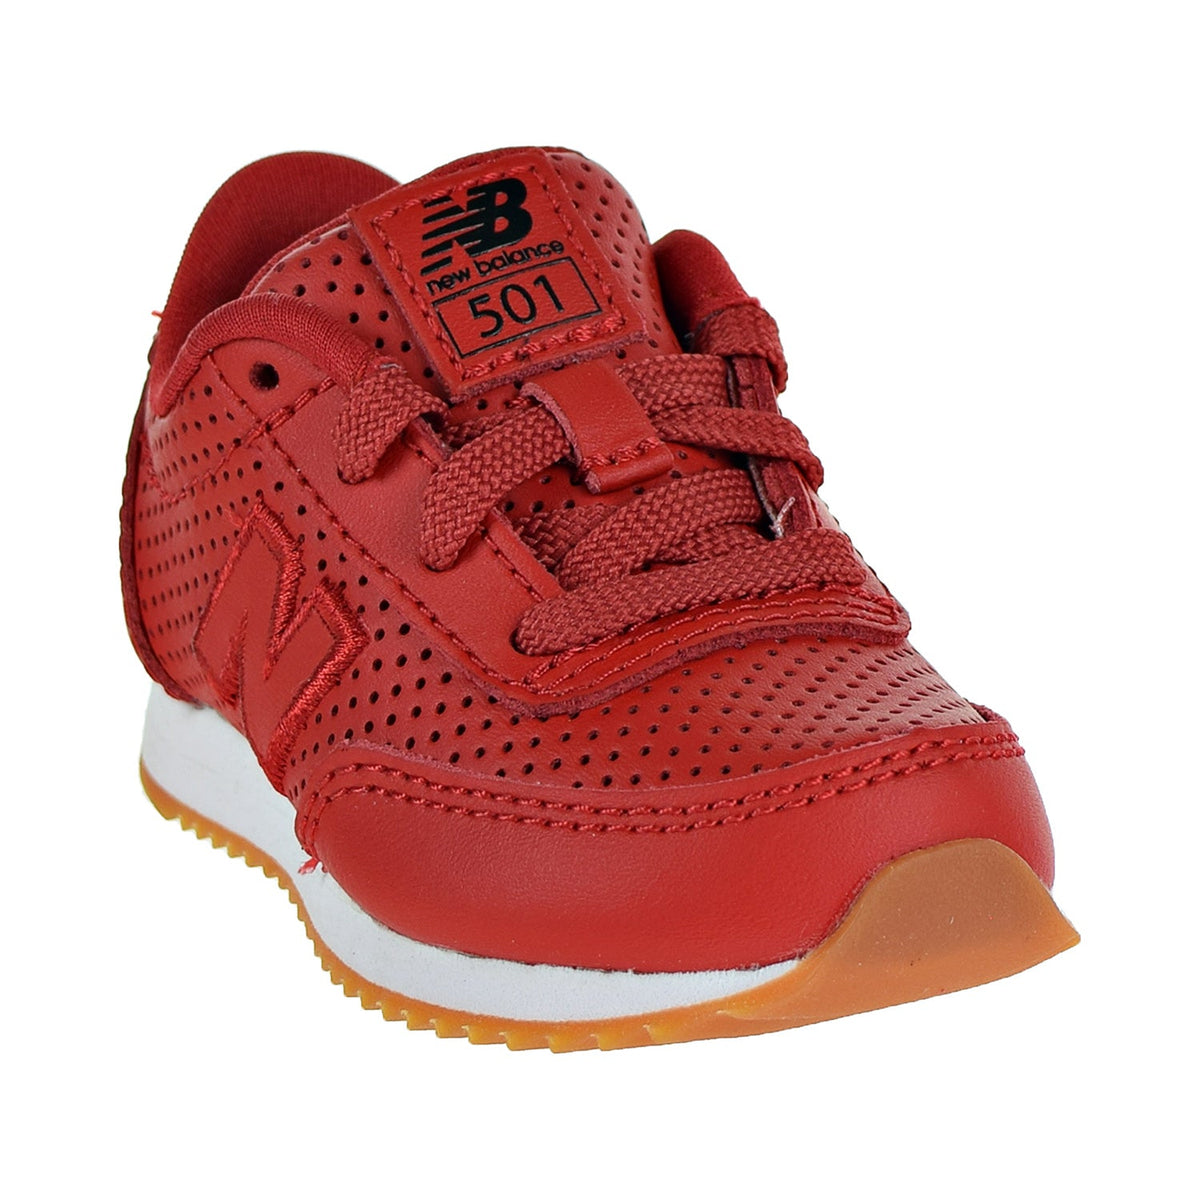 New Balance 501 Ripple Toddler'S Shoes Red/White – Sports Plaza Ny